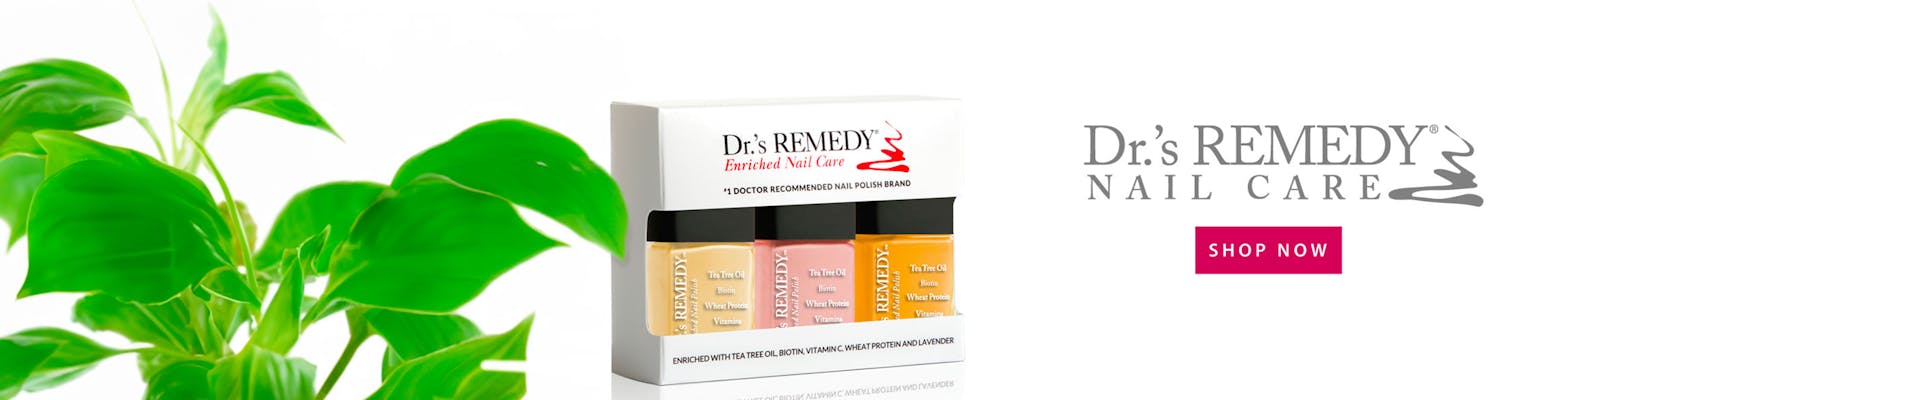 DR'S REMEDY NEW TRIO PACK